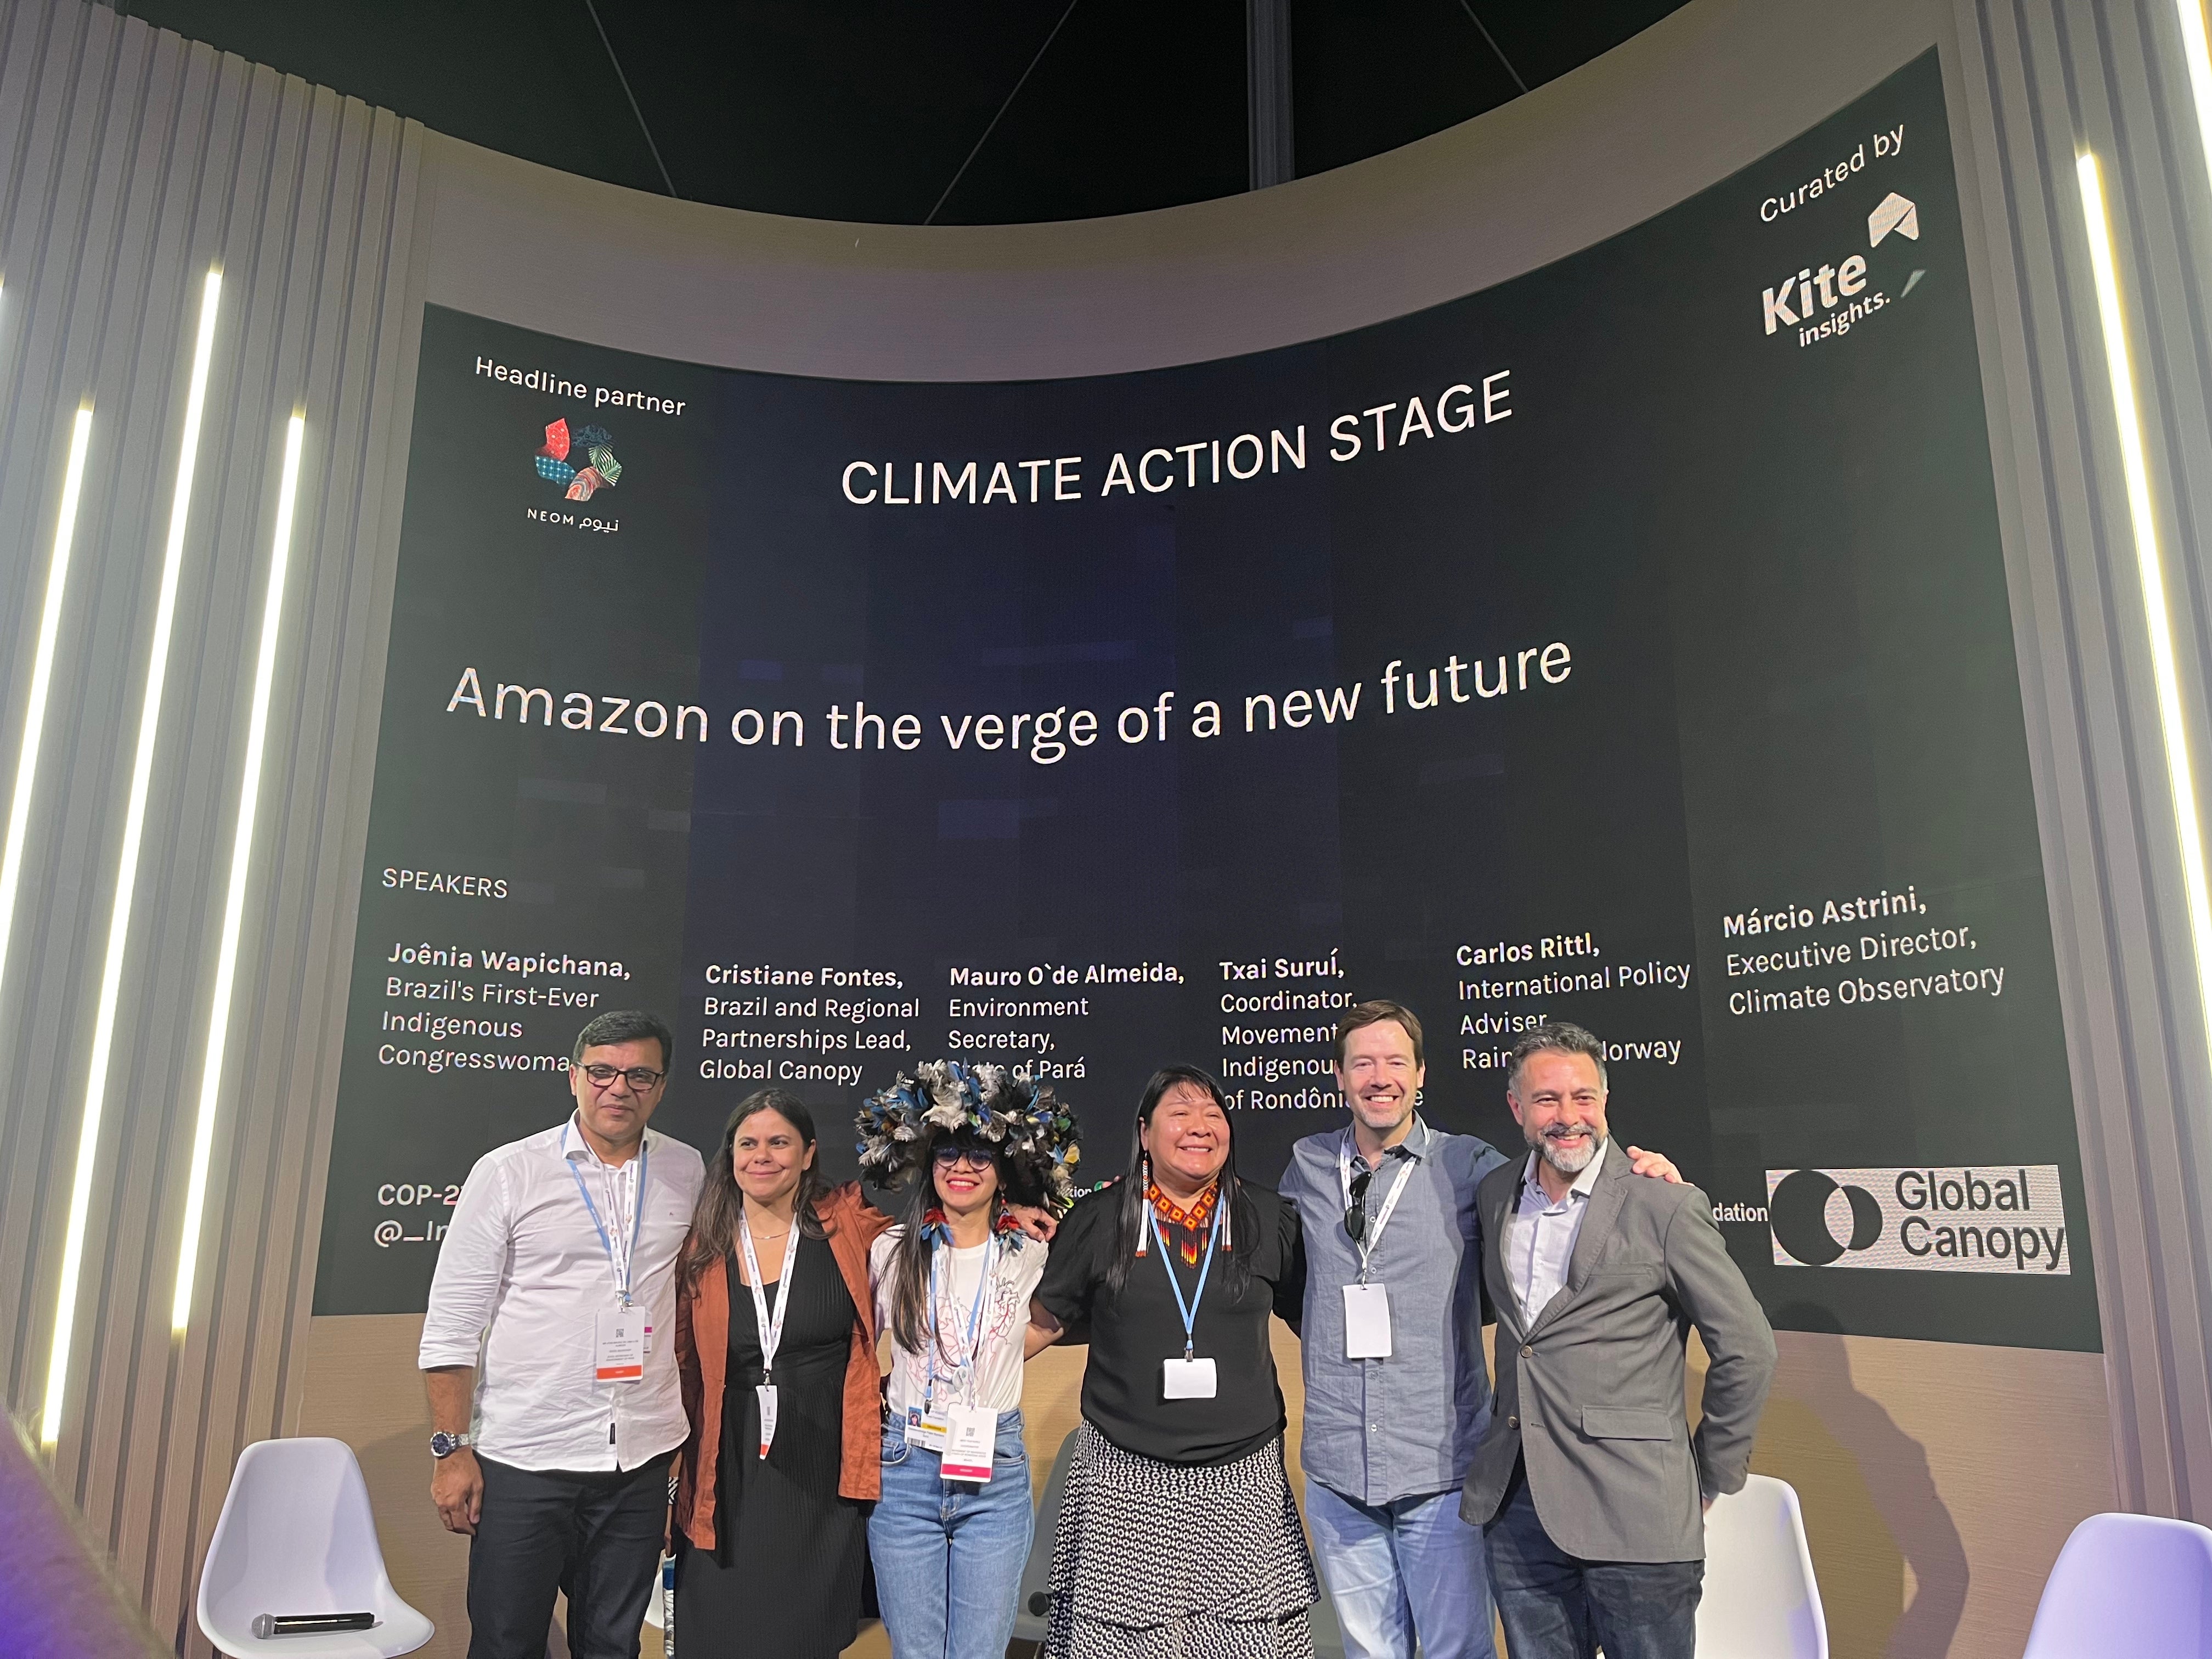 Panelists at the Climate Action Innovation Zone.